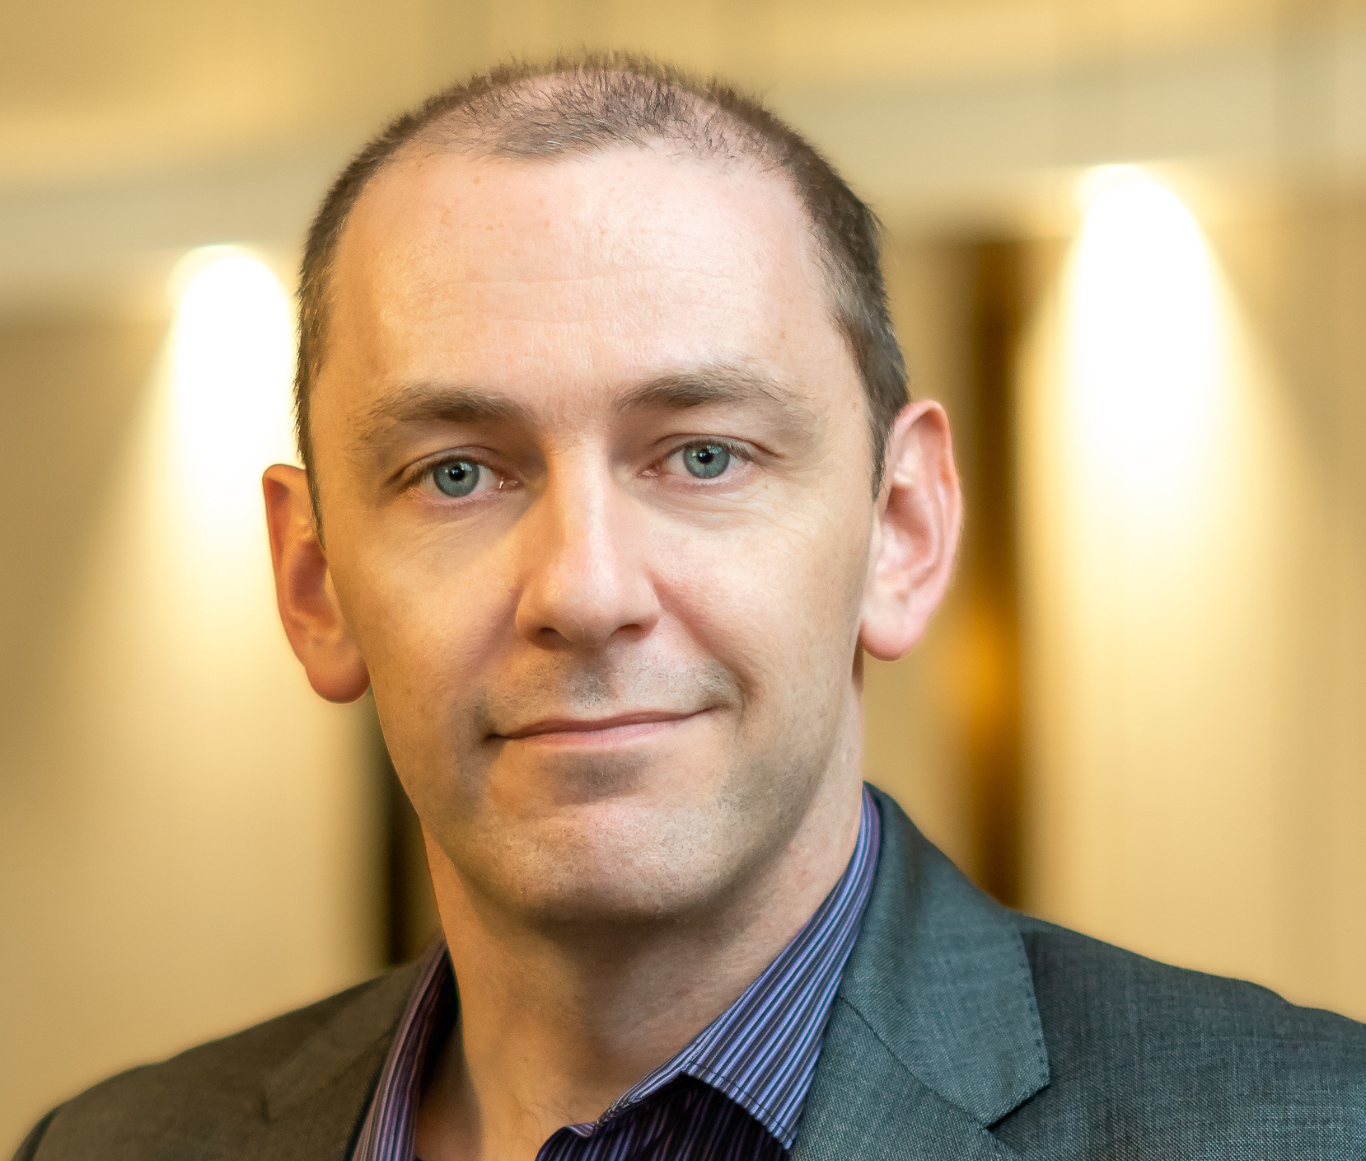 Optima’s Data Science Team Appoints New Head of Engineering